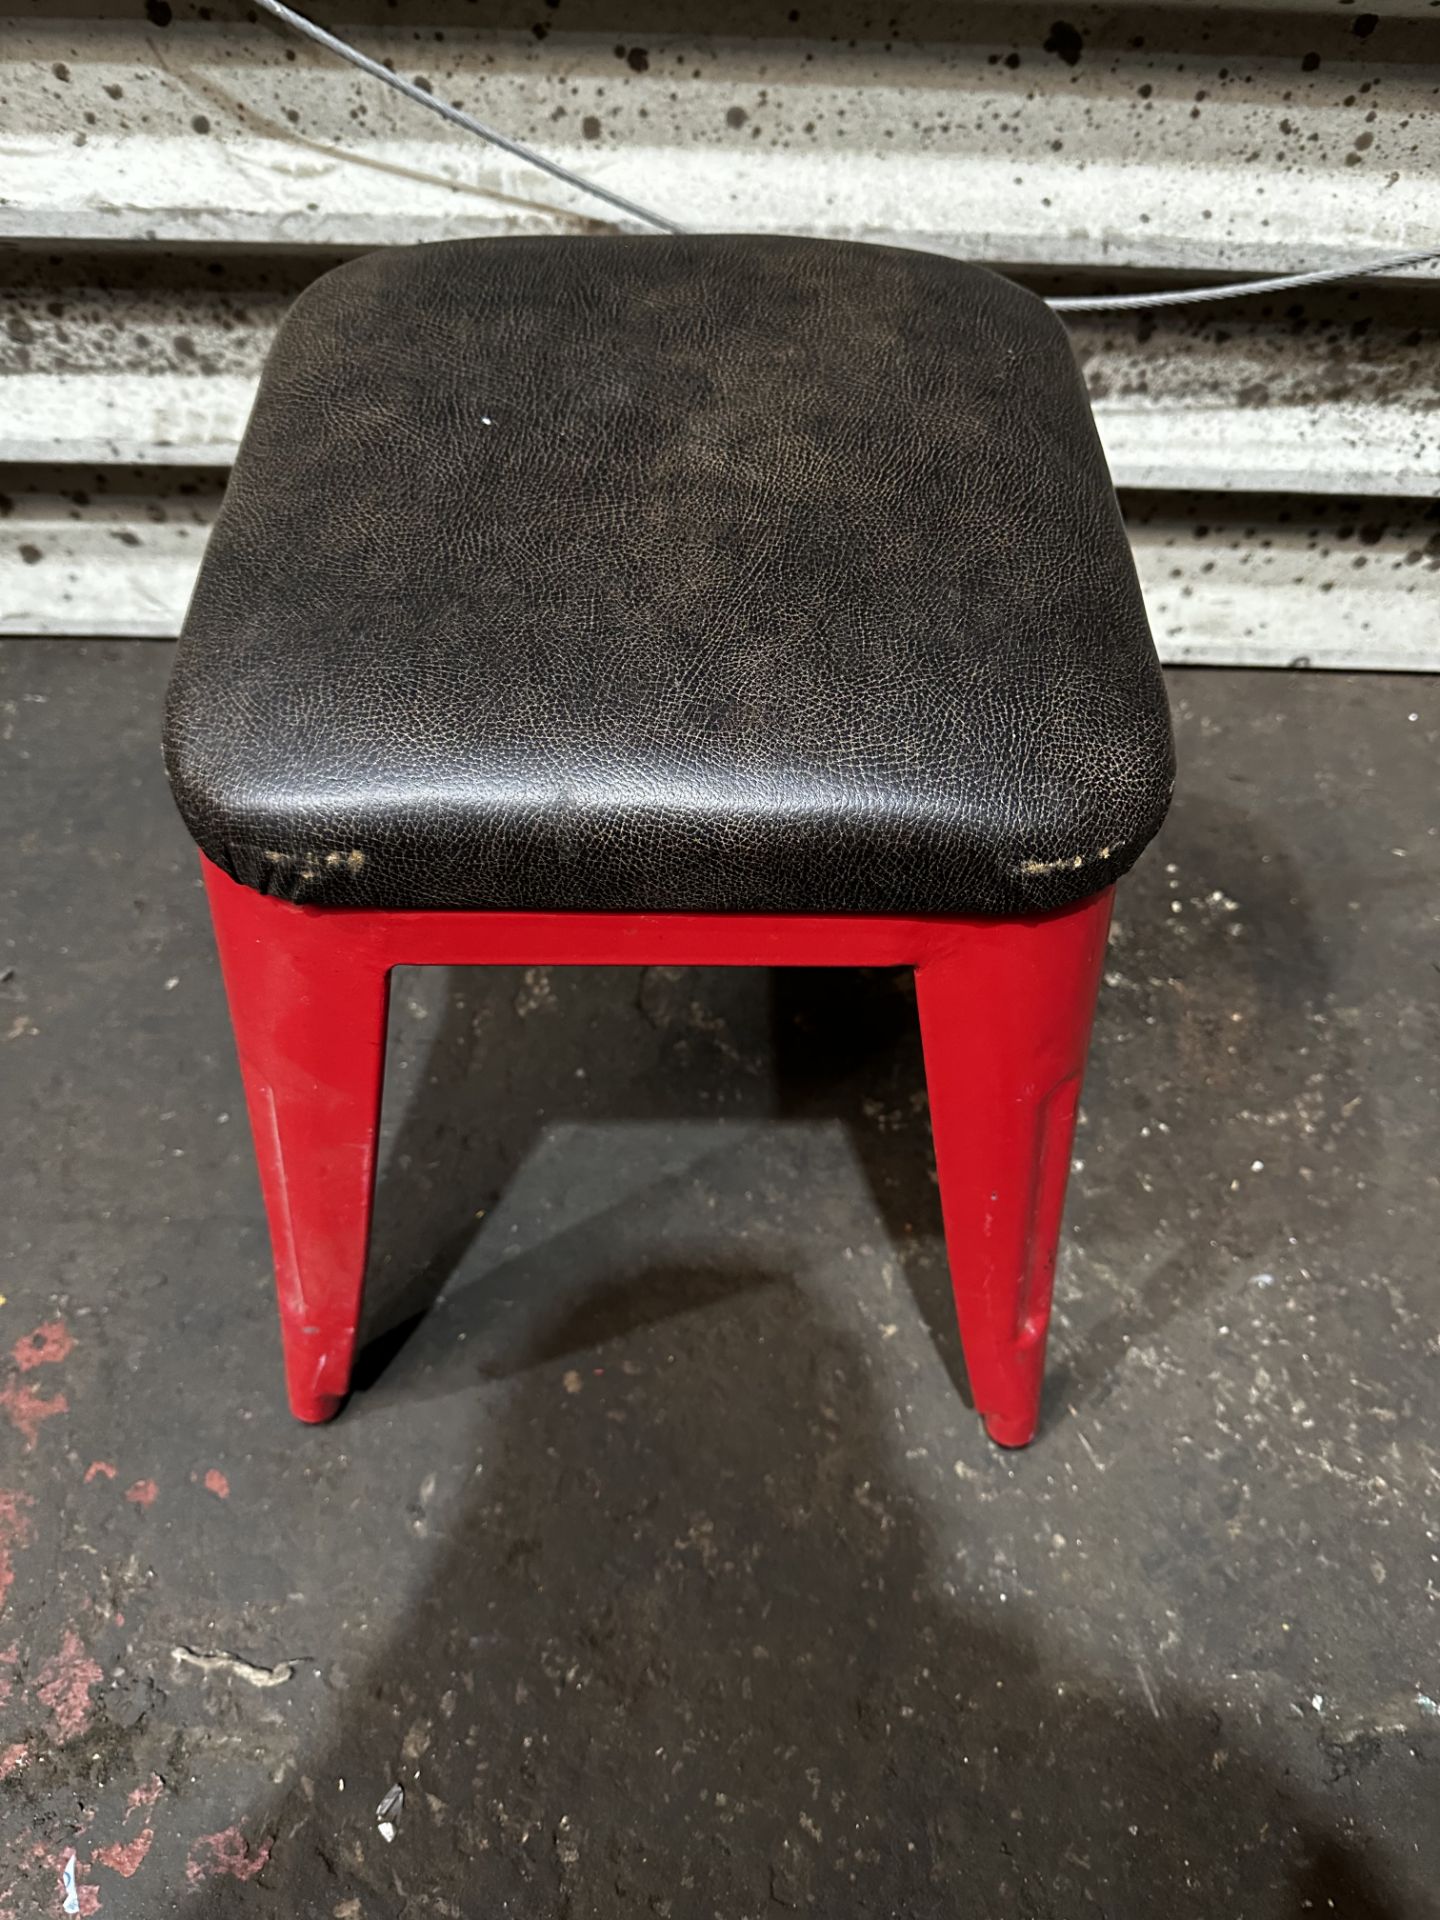 2 x Metal Stool With Upholstered Leather Seat (47*33*33cm) - Image 3 of 4